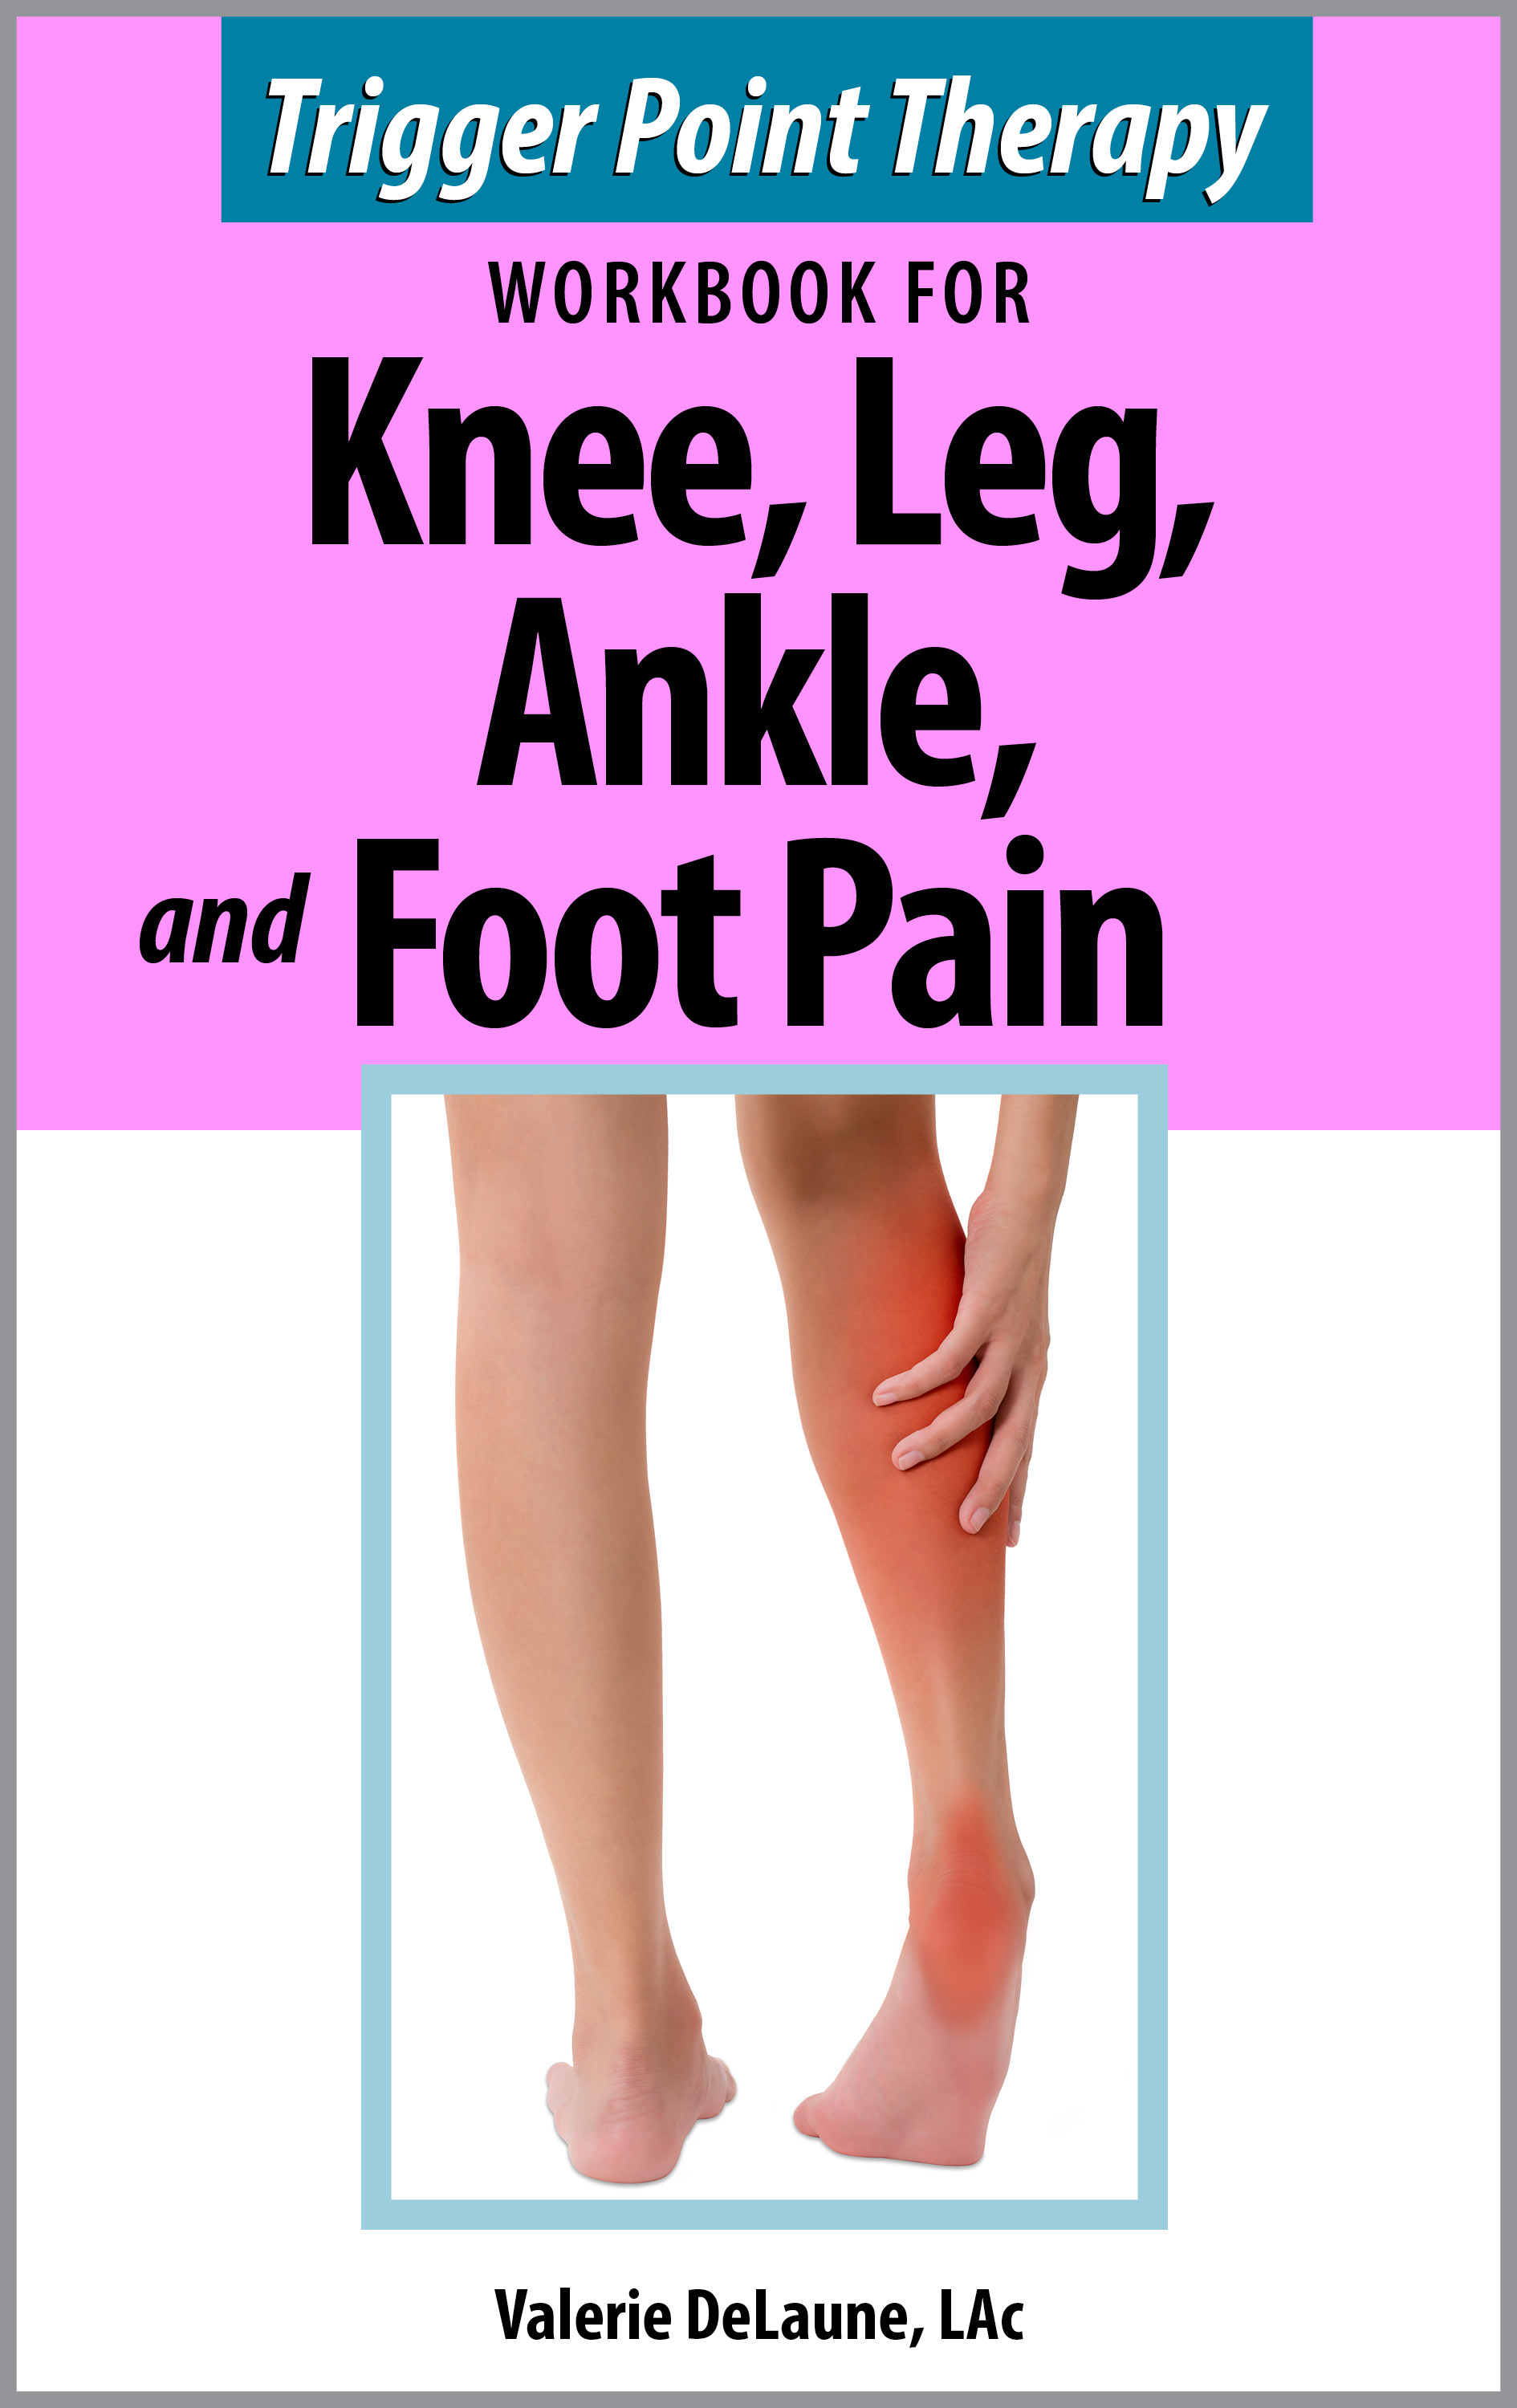 Trigger Point Therapy for Knee, Leg, Ankle and Foot Pain